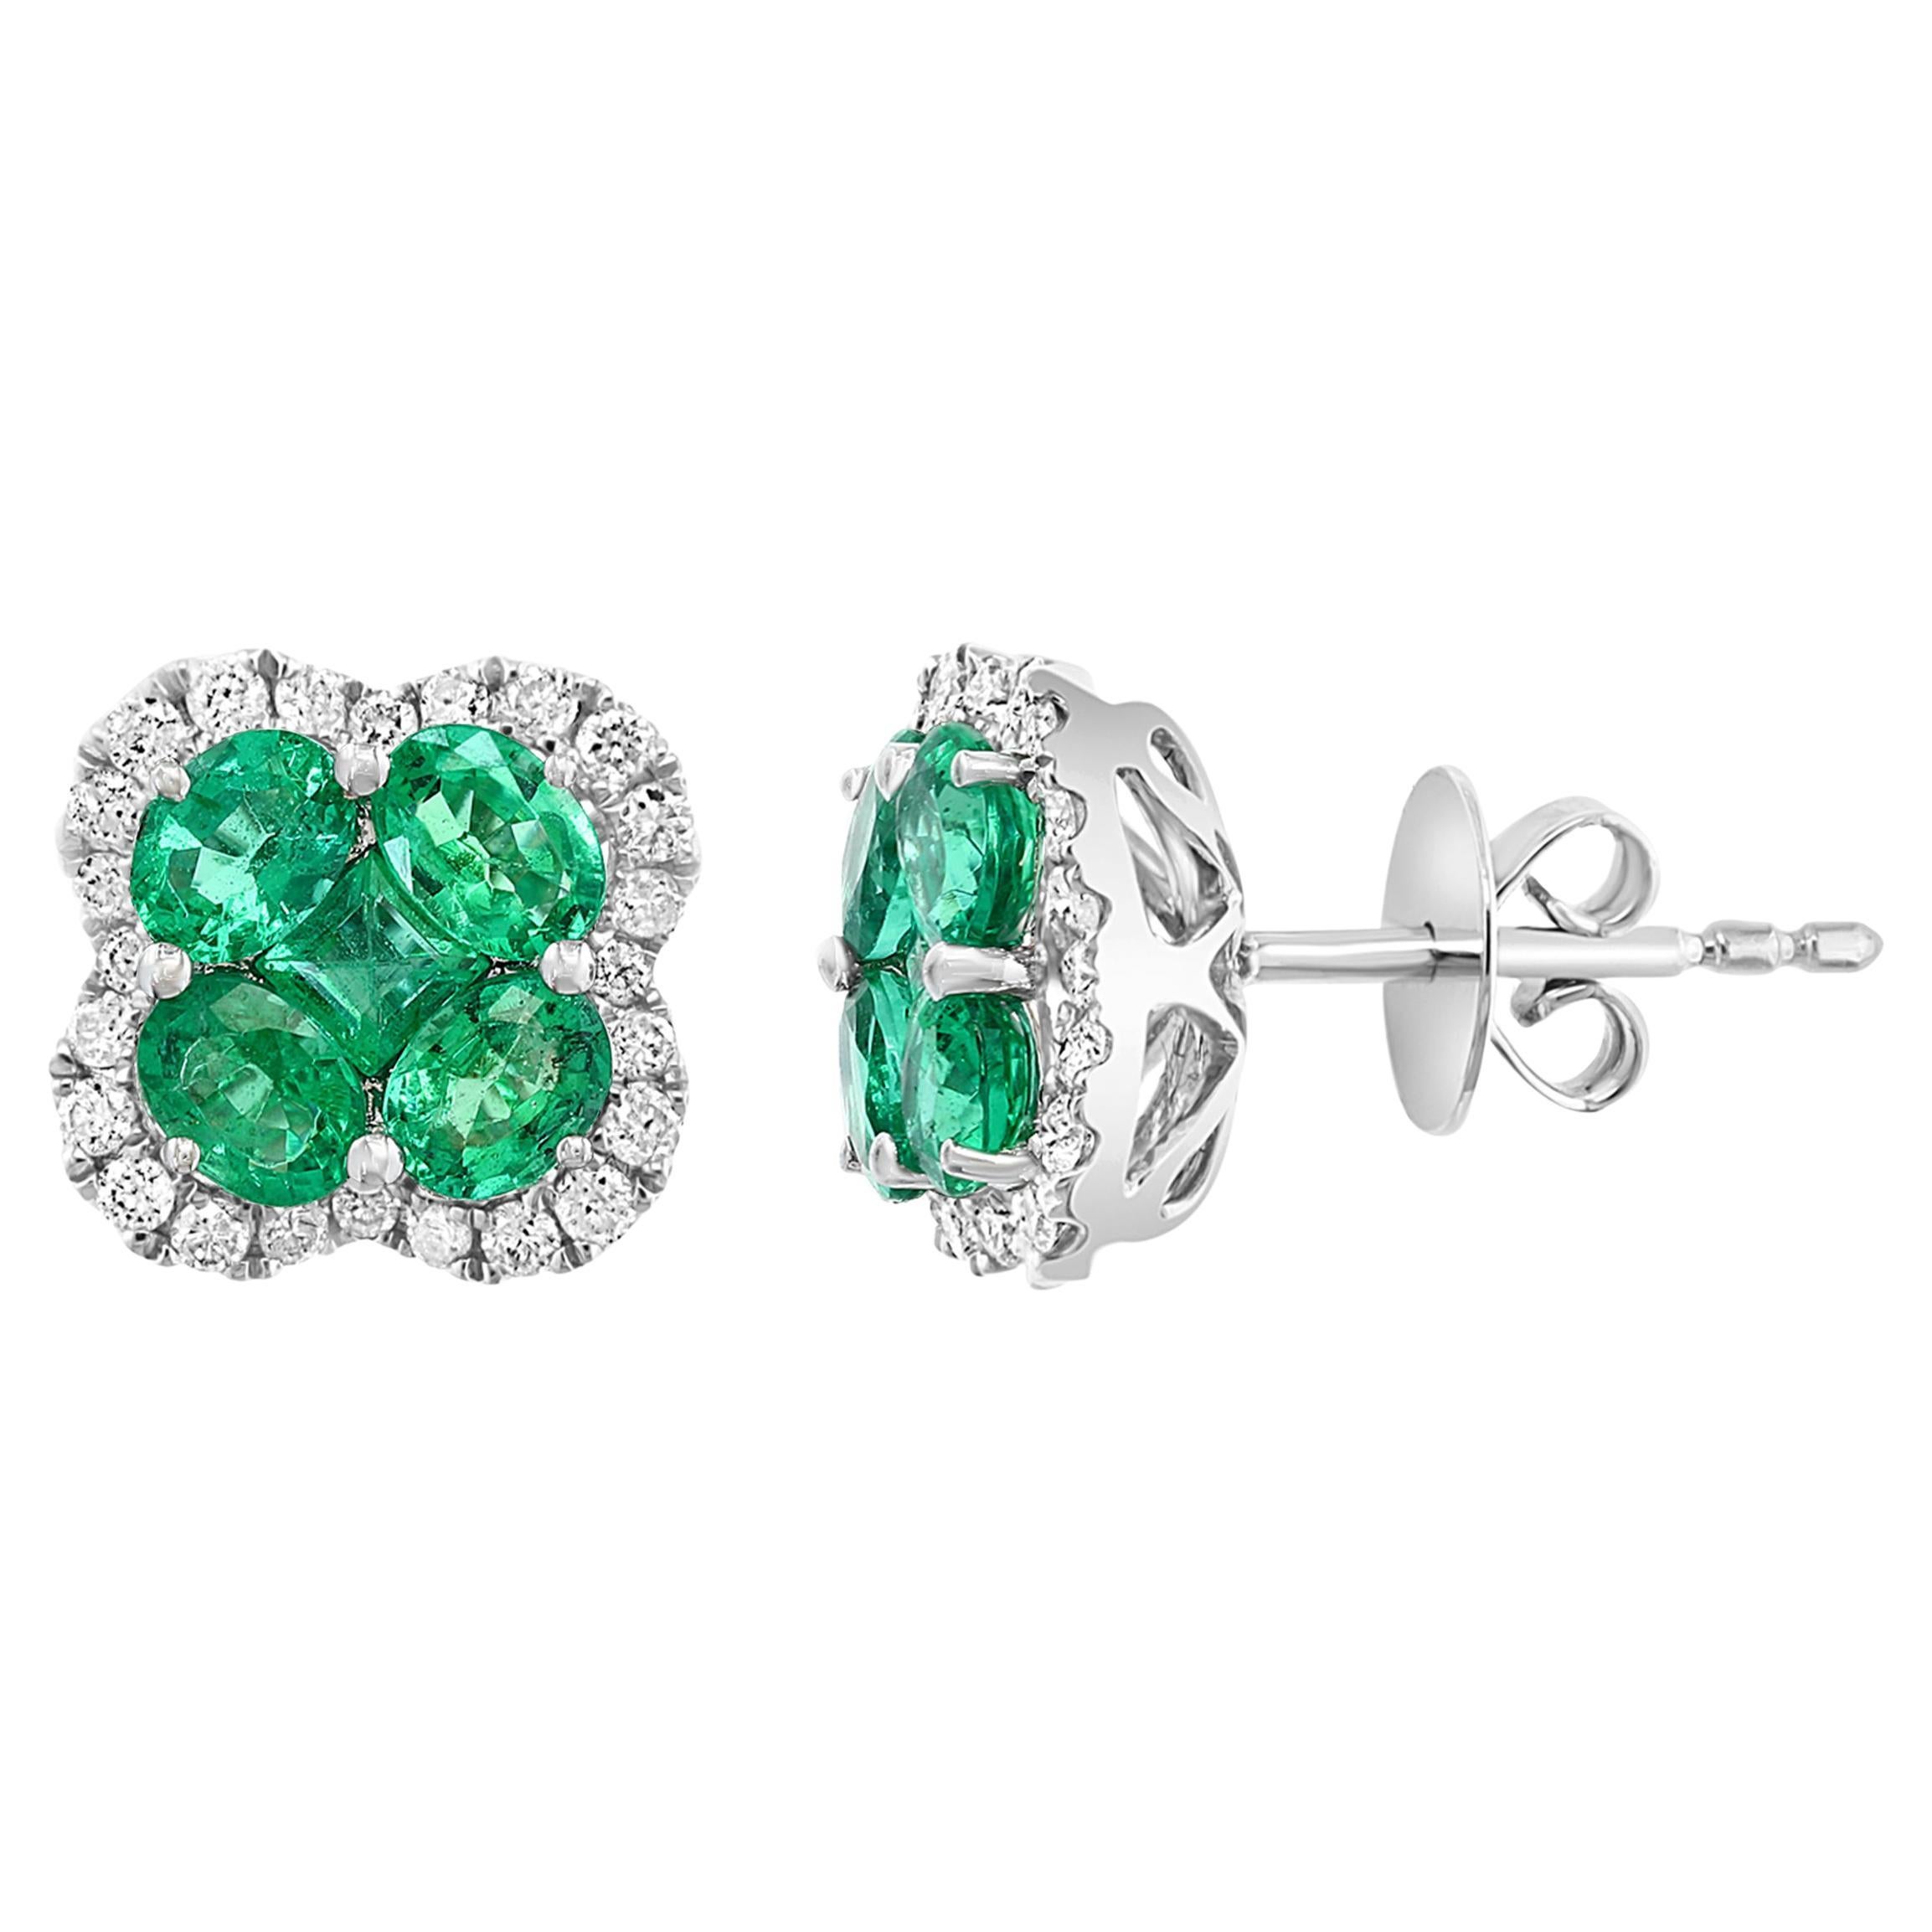 1.16 Carat Oval cut Emerald and Diamond Stud Earrings in 18K White Gold